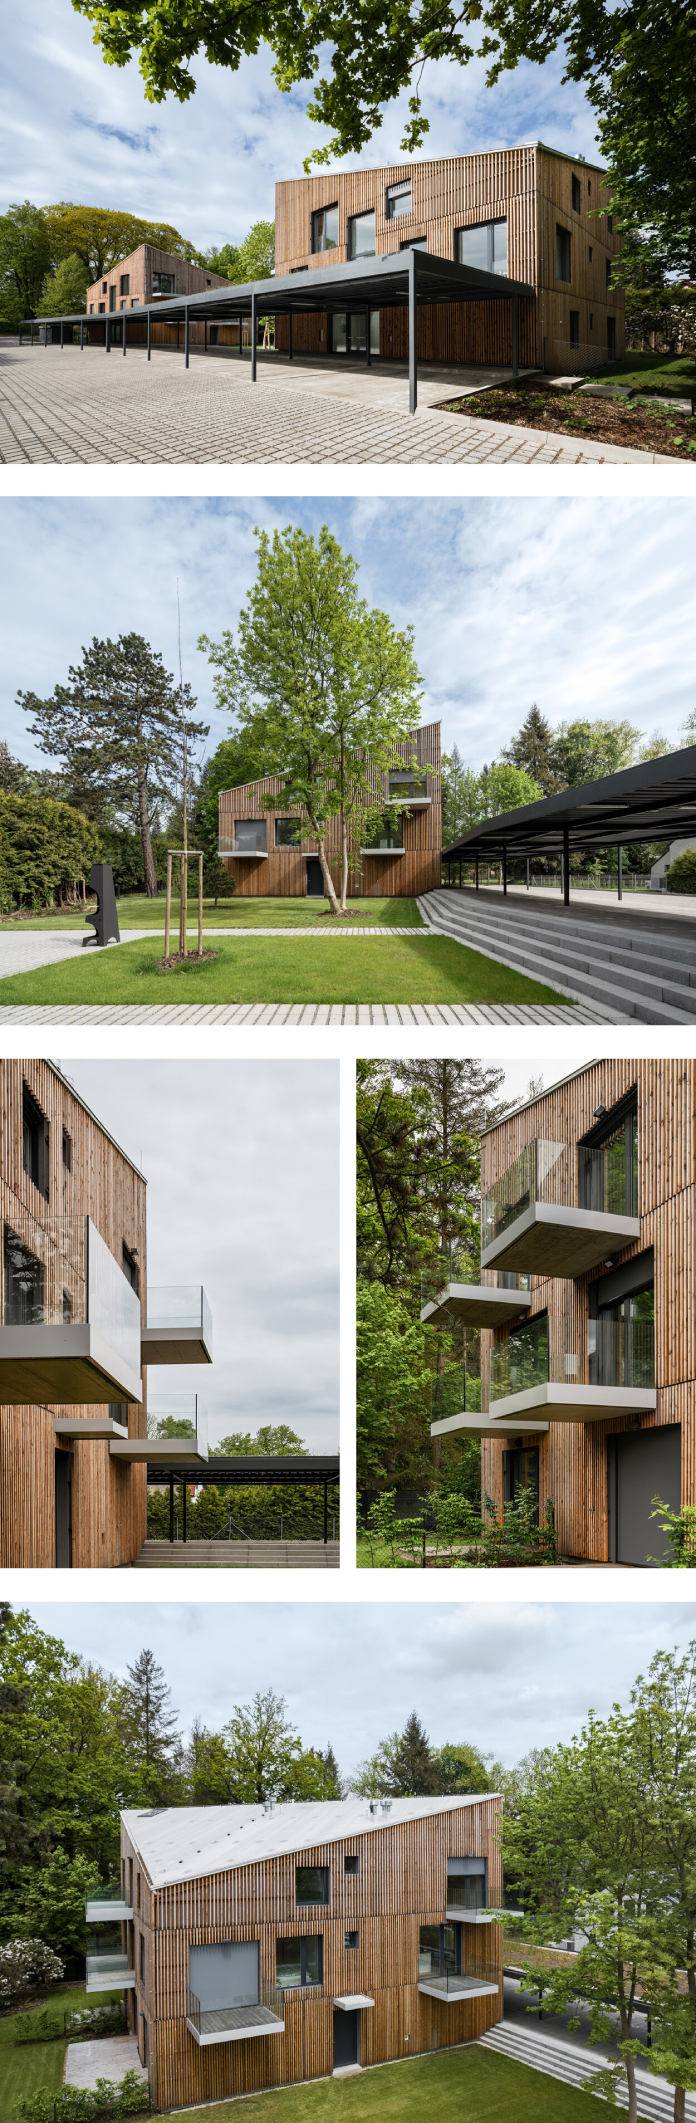 Two villas designed by NEW HOW architects